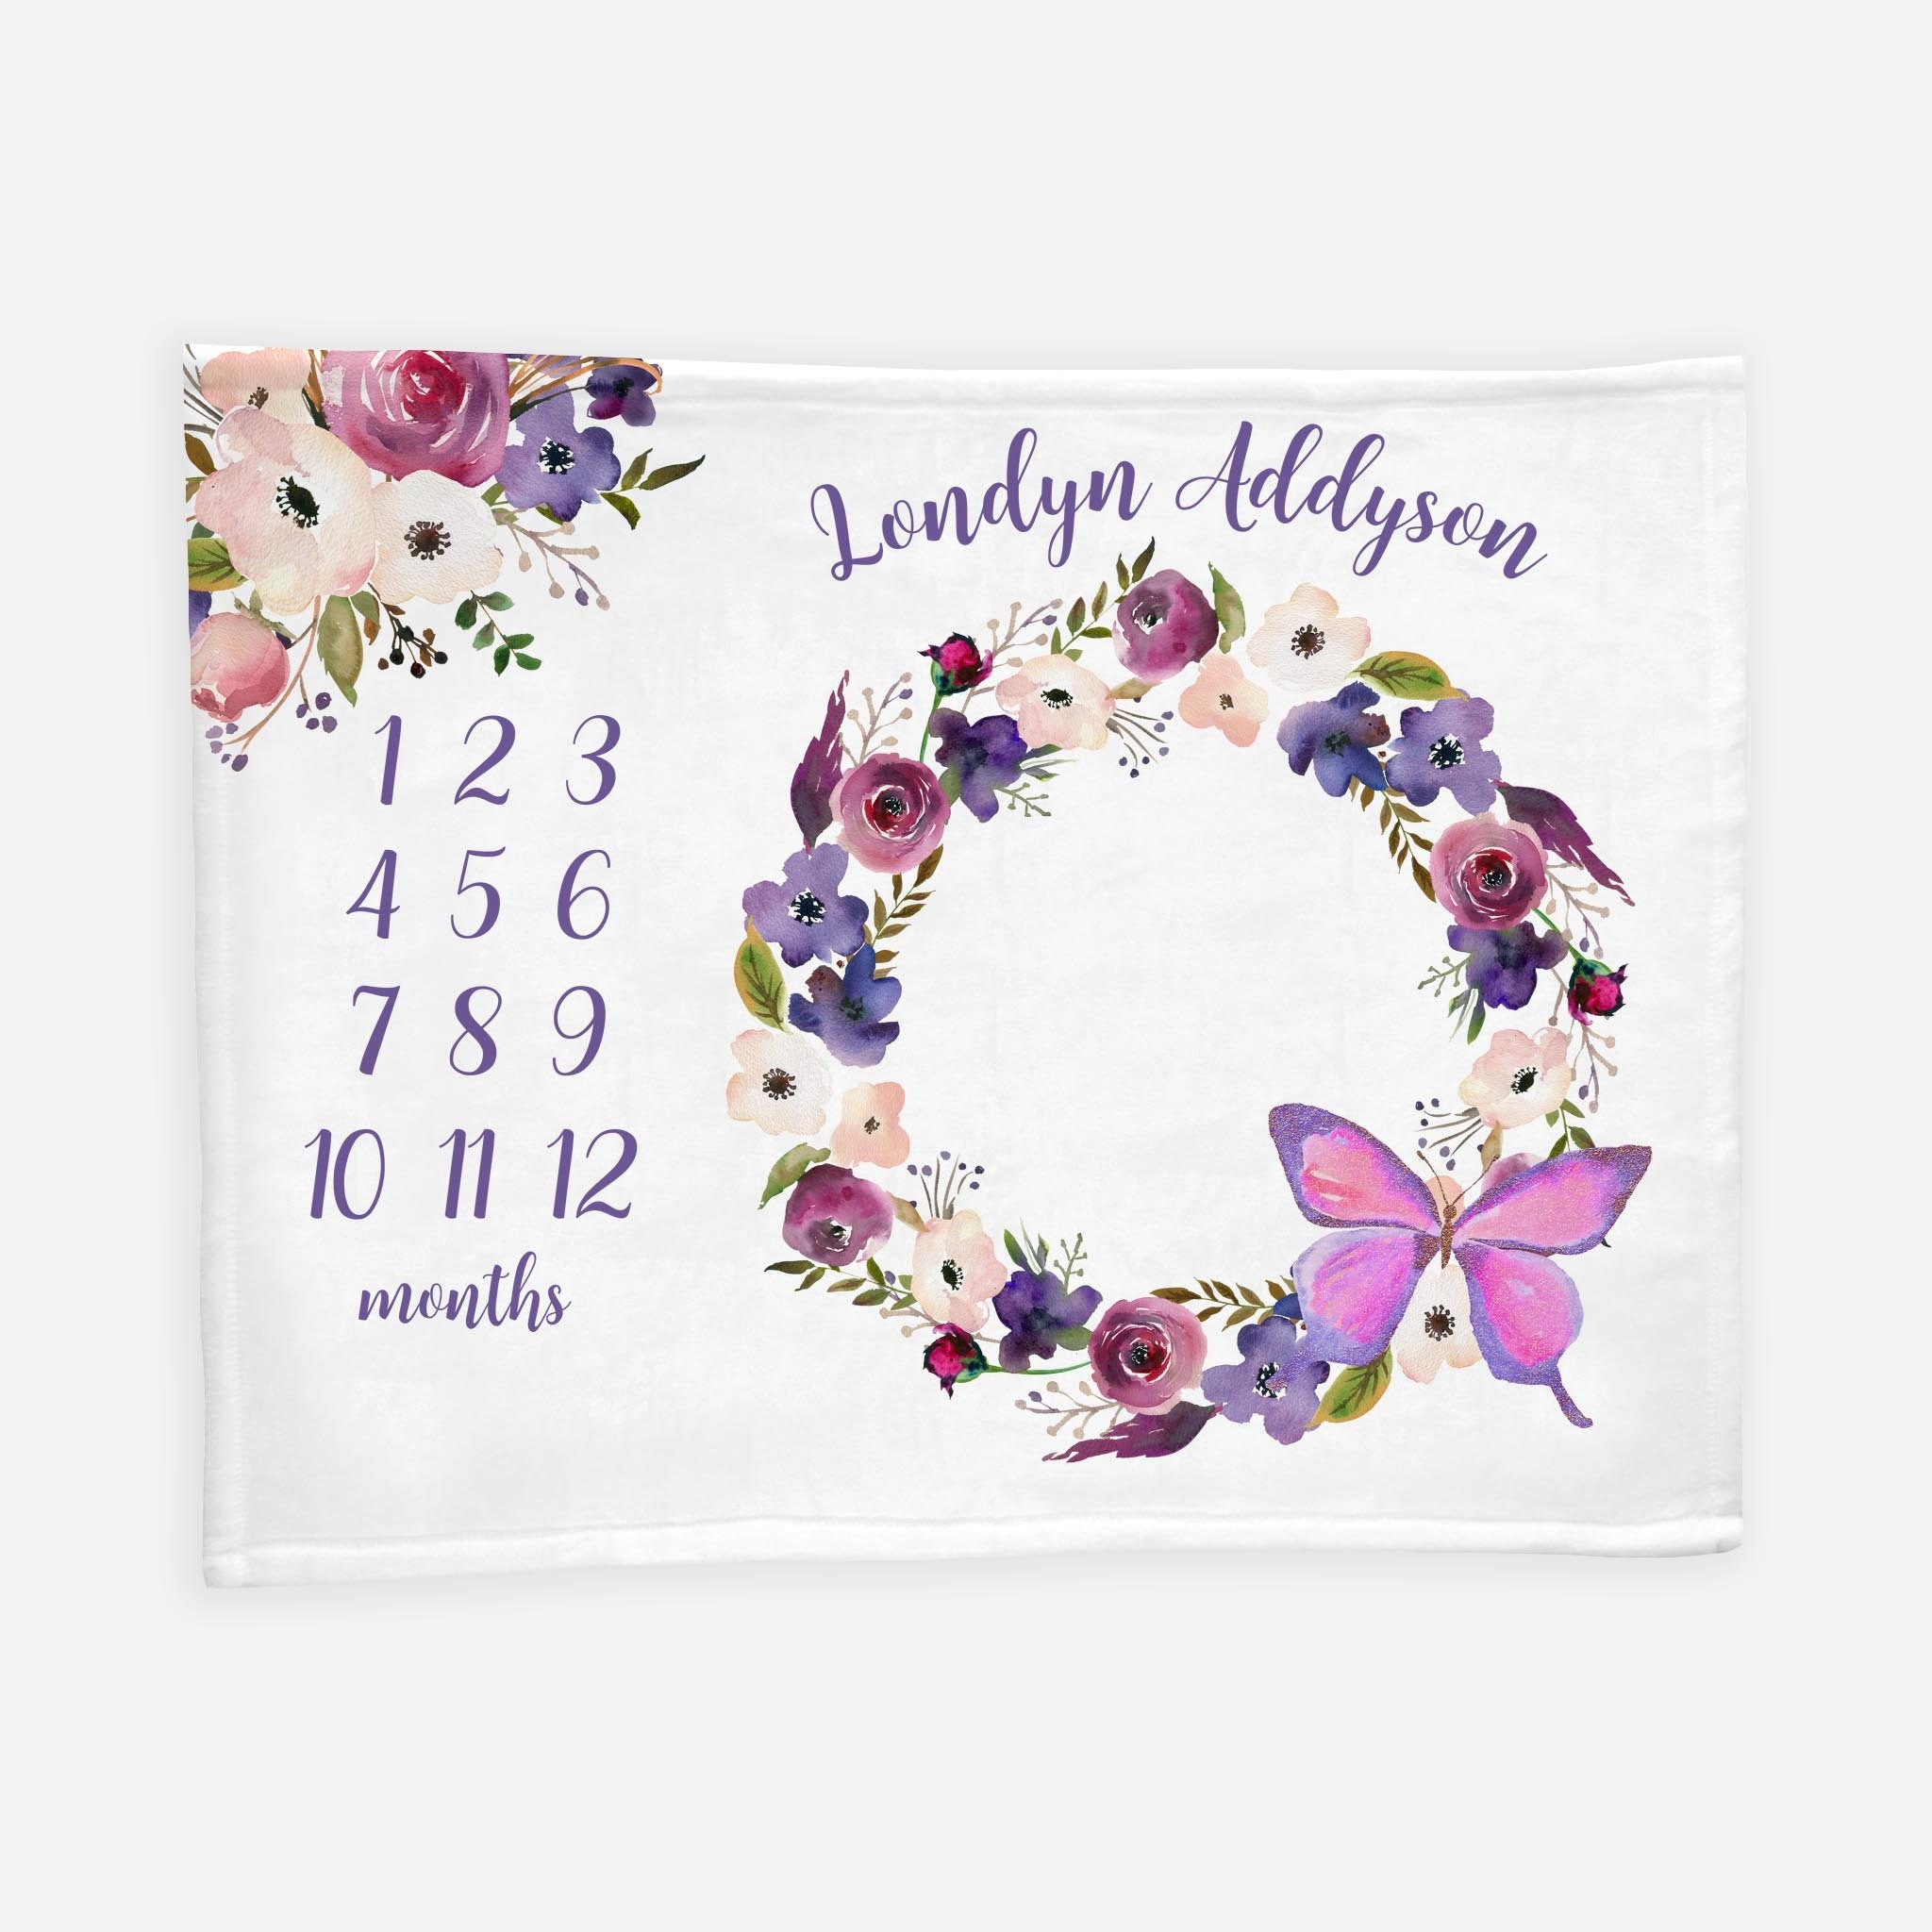 P 390 Personalized Address Labels Pretty Flowers Border Buy 3 get 1 free 